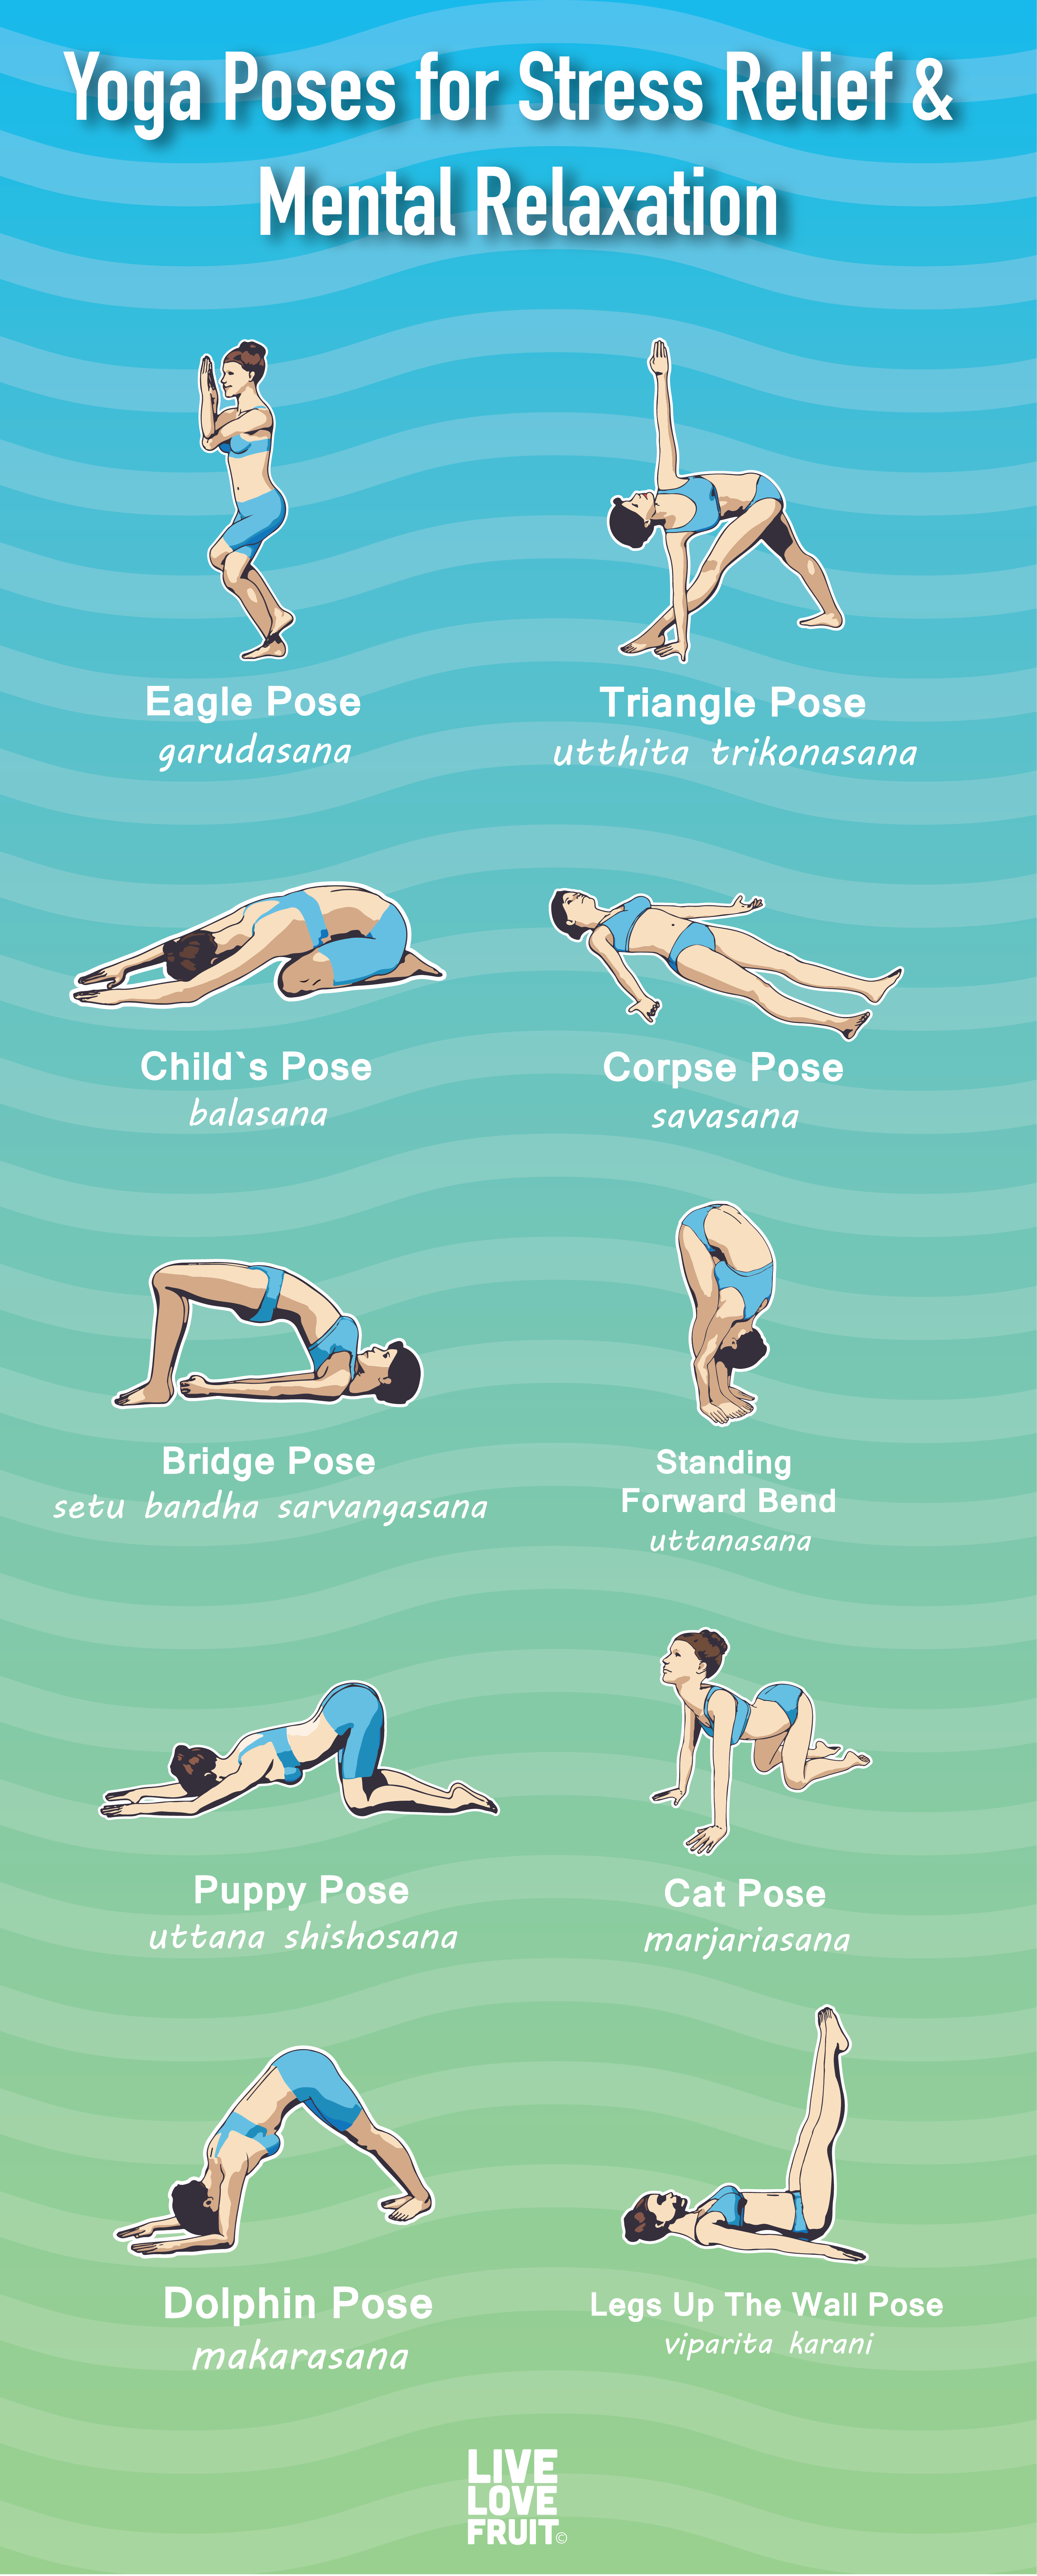 10 Yoga Poses to Reduce Stress, Tension and Promote Mental Relaxation ...